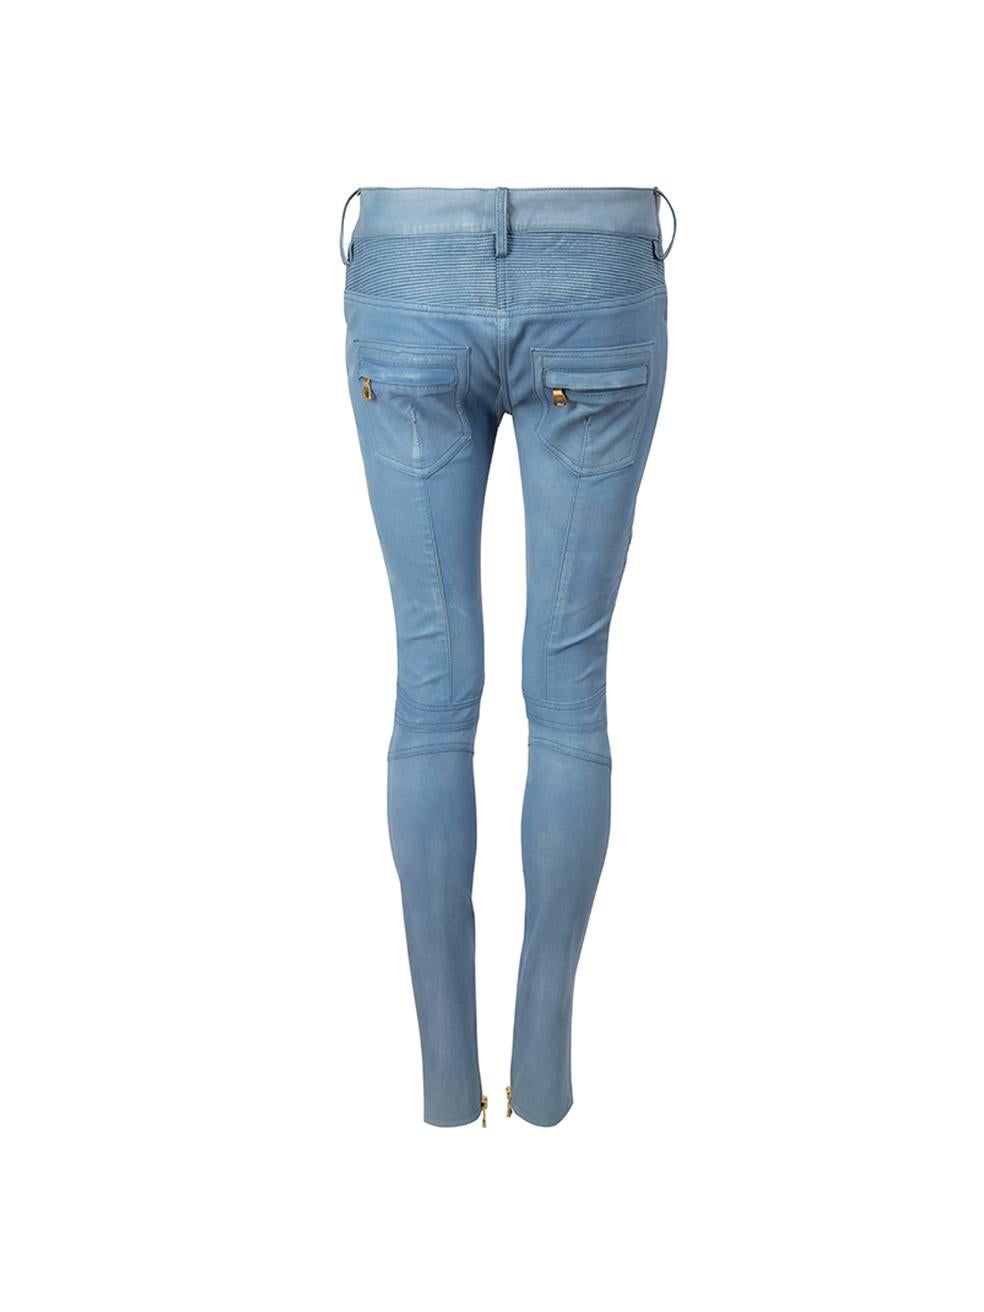 Balmain Women's Blue Leather Biker Skinny Trousers In Good Condition For Sale In London, GB